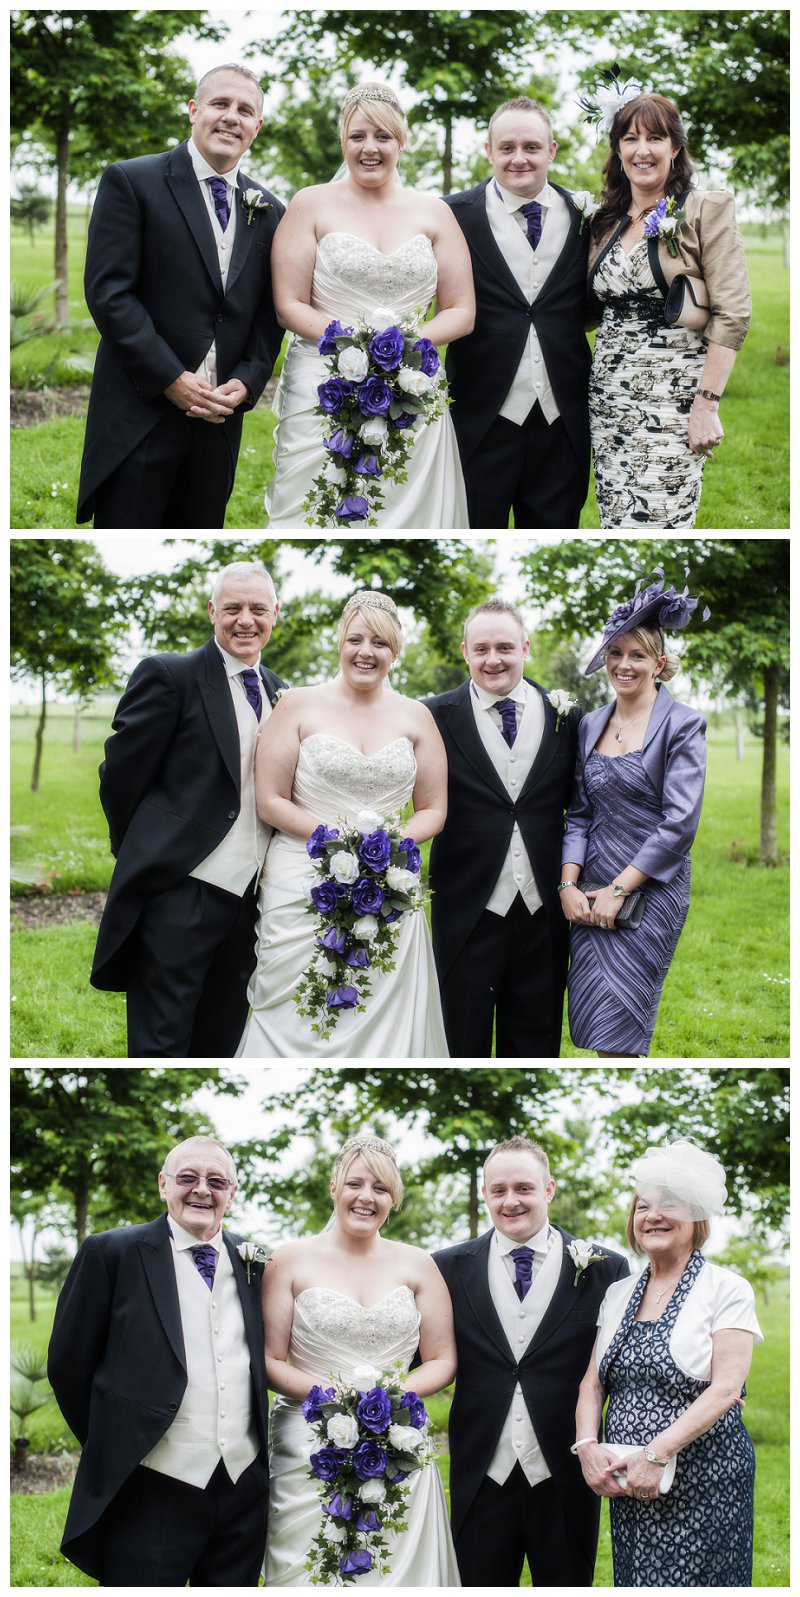 Blue Lights Photography: [Wedding] Purple and White themed Wedding at ...